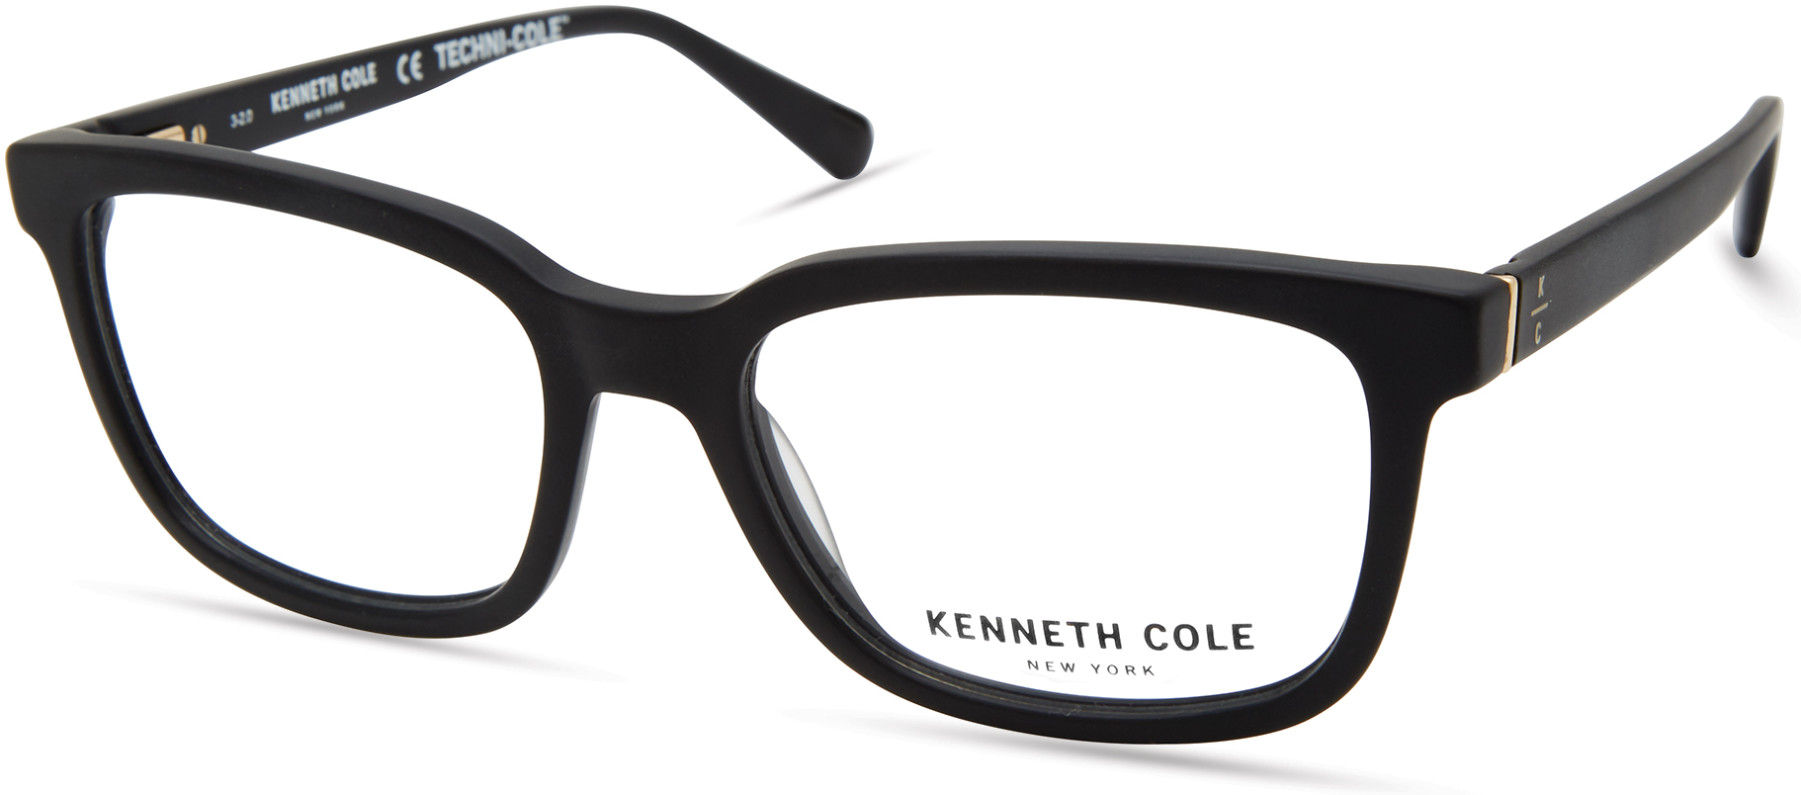 KENNETH COLE NY 0320 002